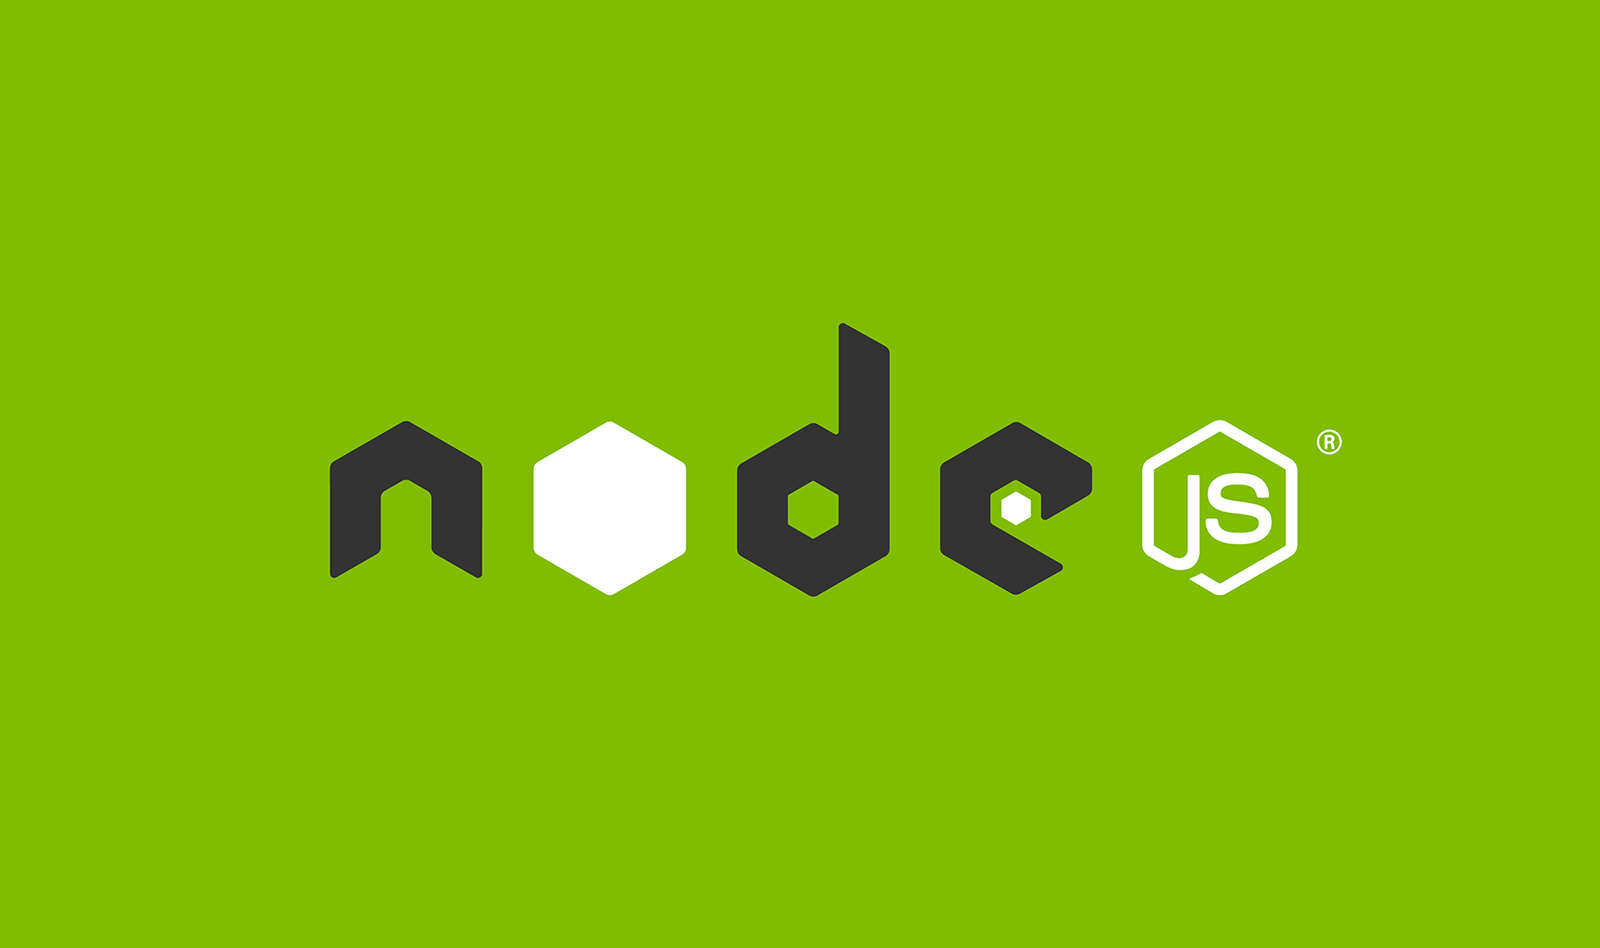 NodeJs 16 Released - Will become LTS in October 2021